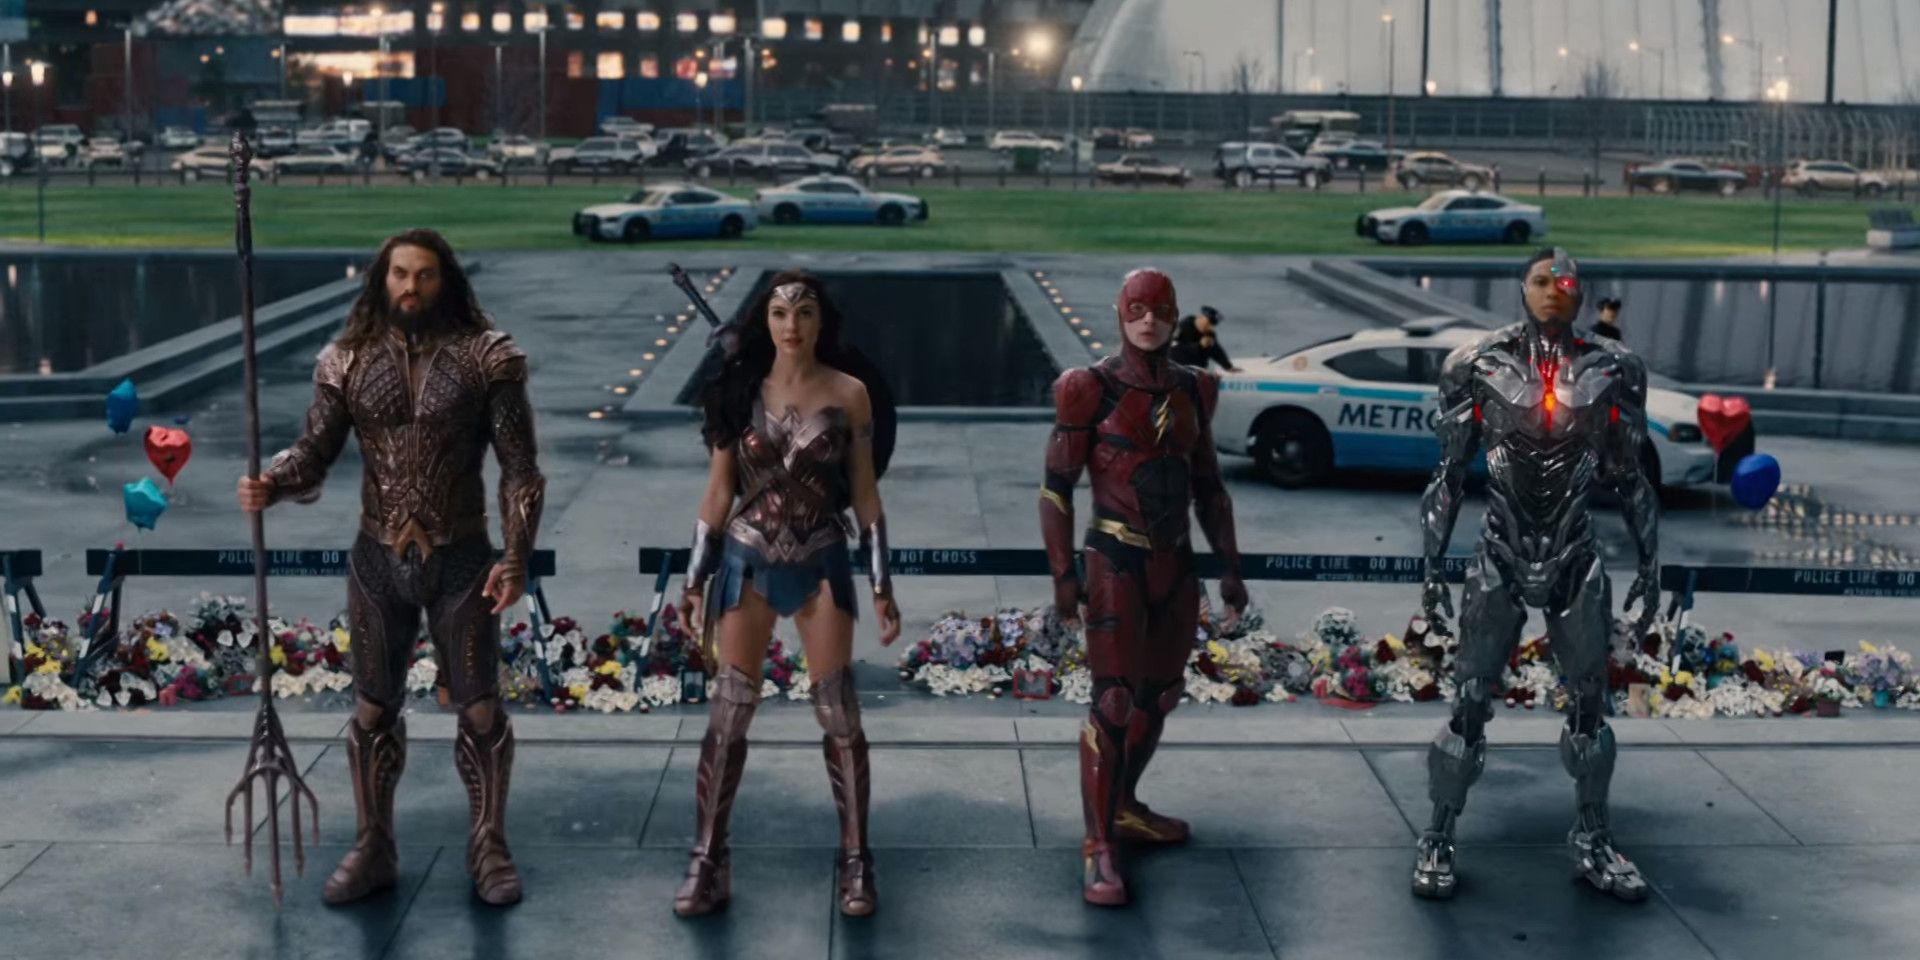 The Justice League seeing Superman return